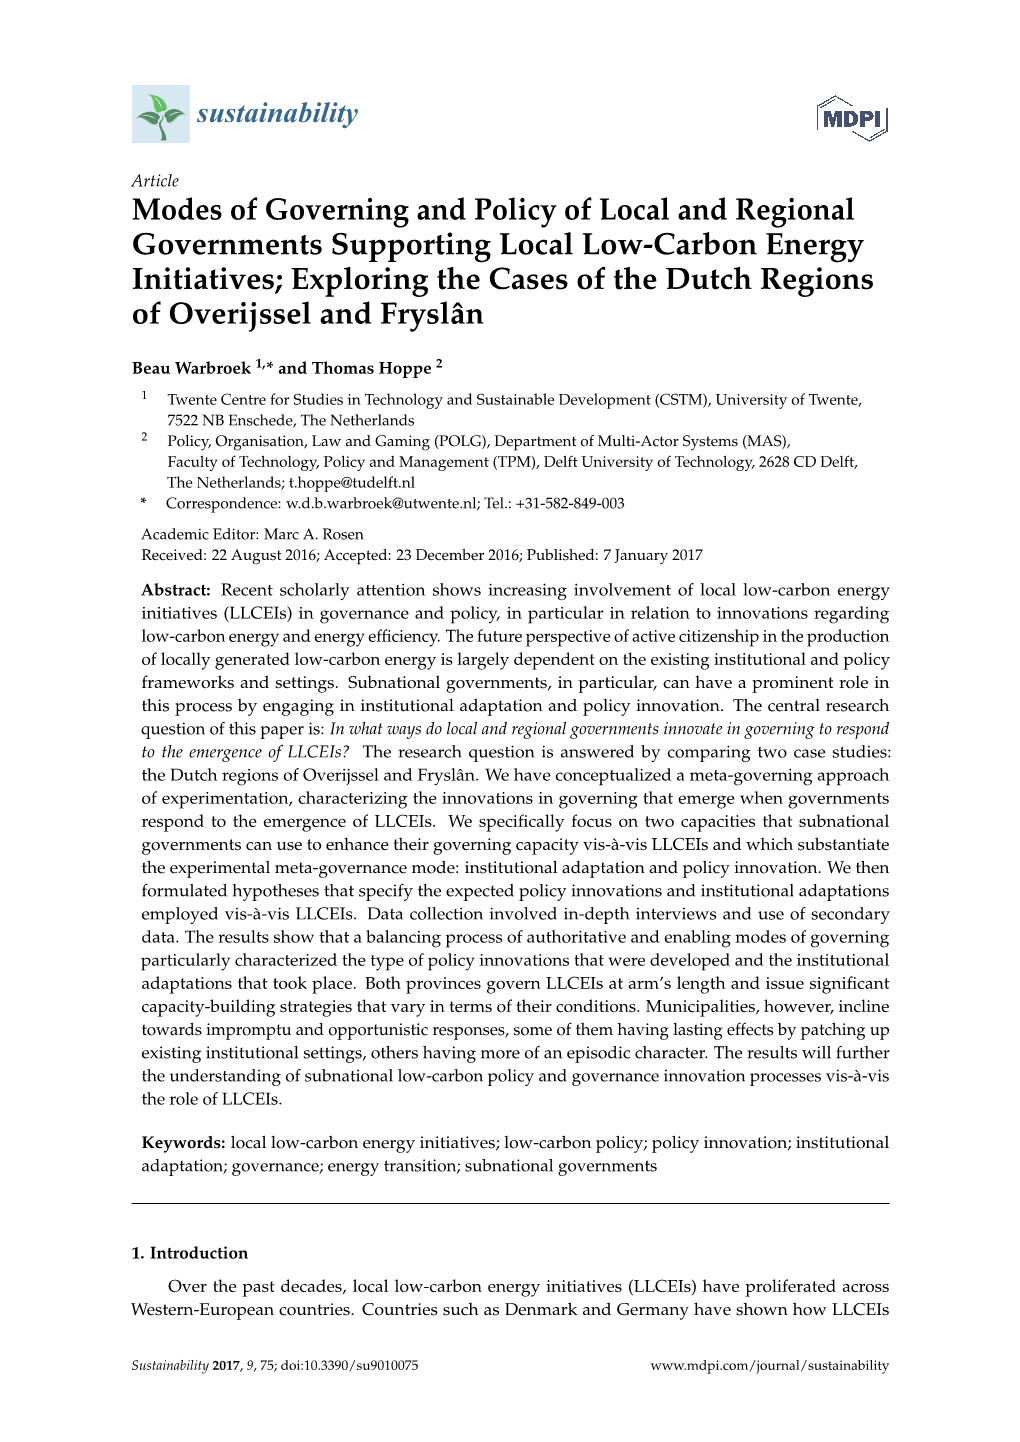 [1.0]Modes of Governing and Policy of Local and Regional Governments Supporting Local Low-Carbon Energy Initiatives